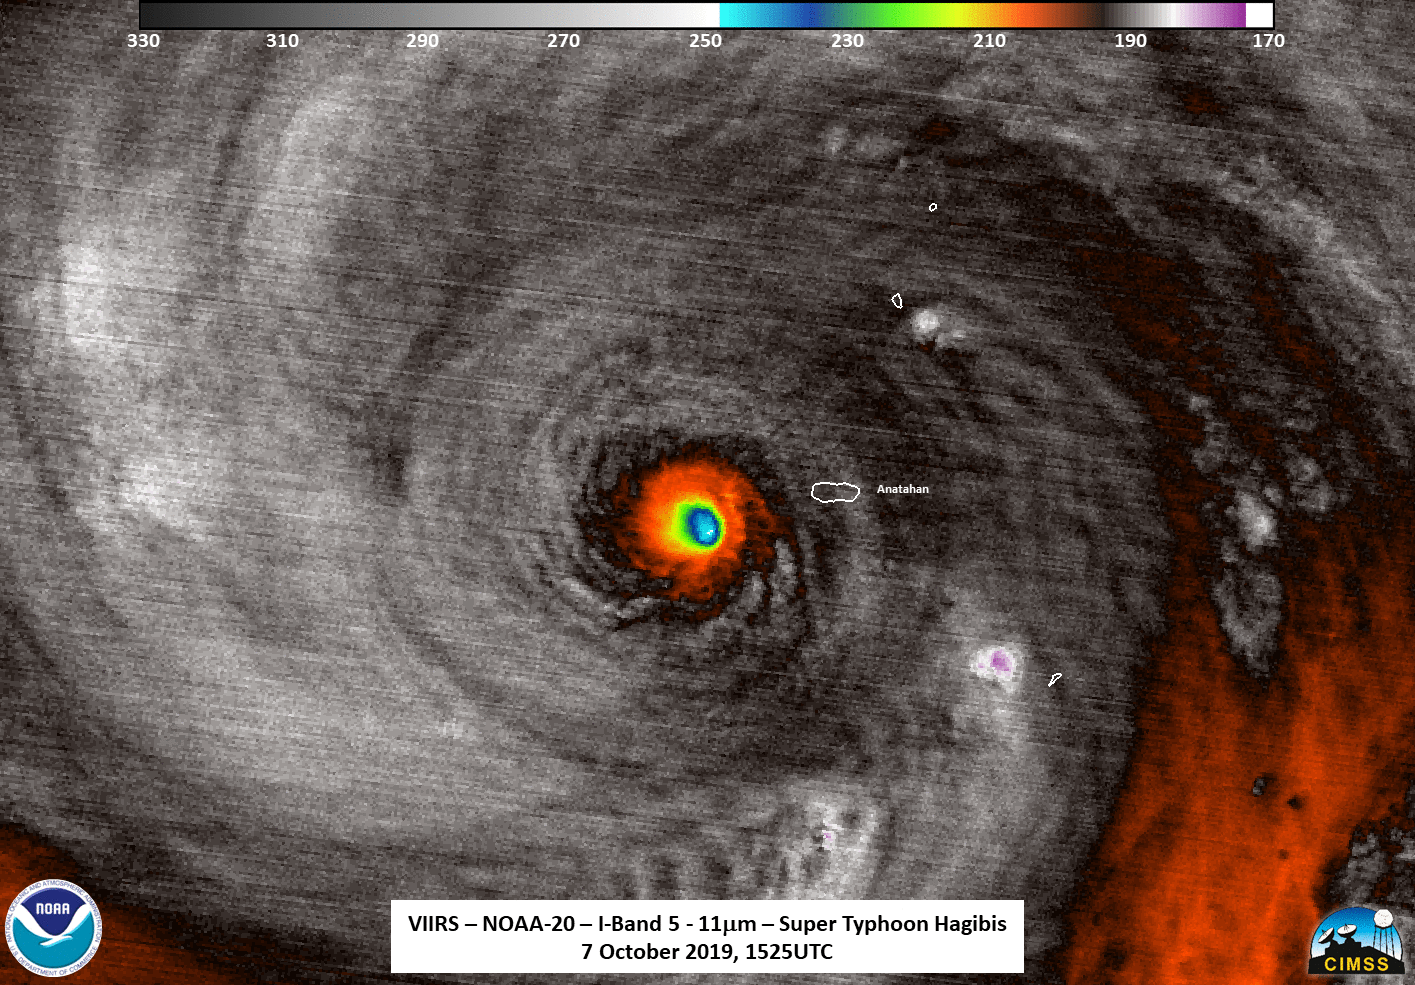 VIIRS Infrared Window (11.45 µm) images from NOAA-20 and Suomi NPP (credit: William Straka, CIMSS) [click to enlarge]